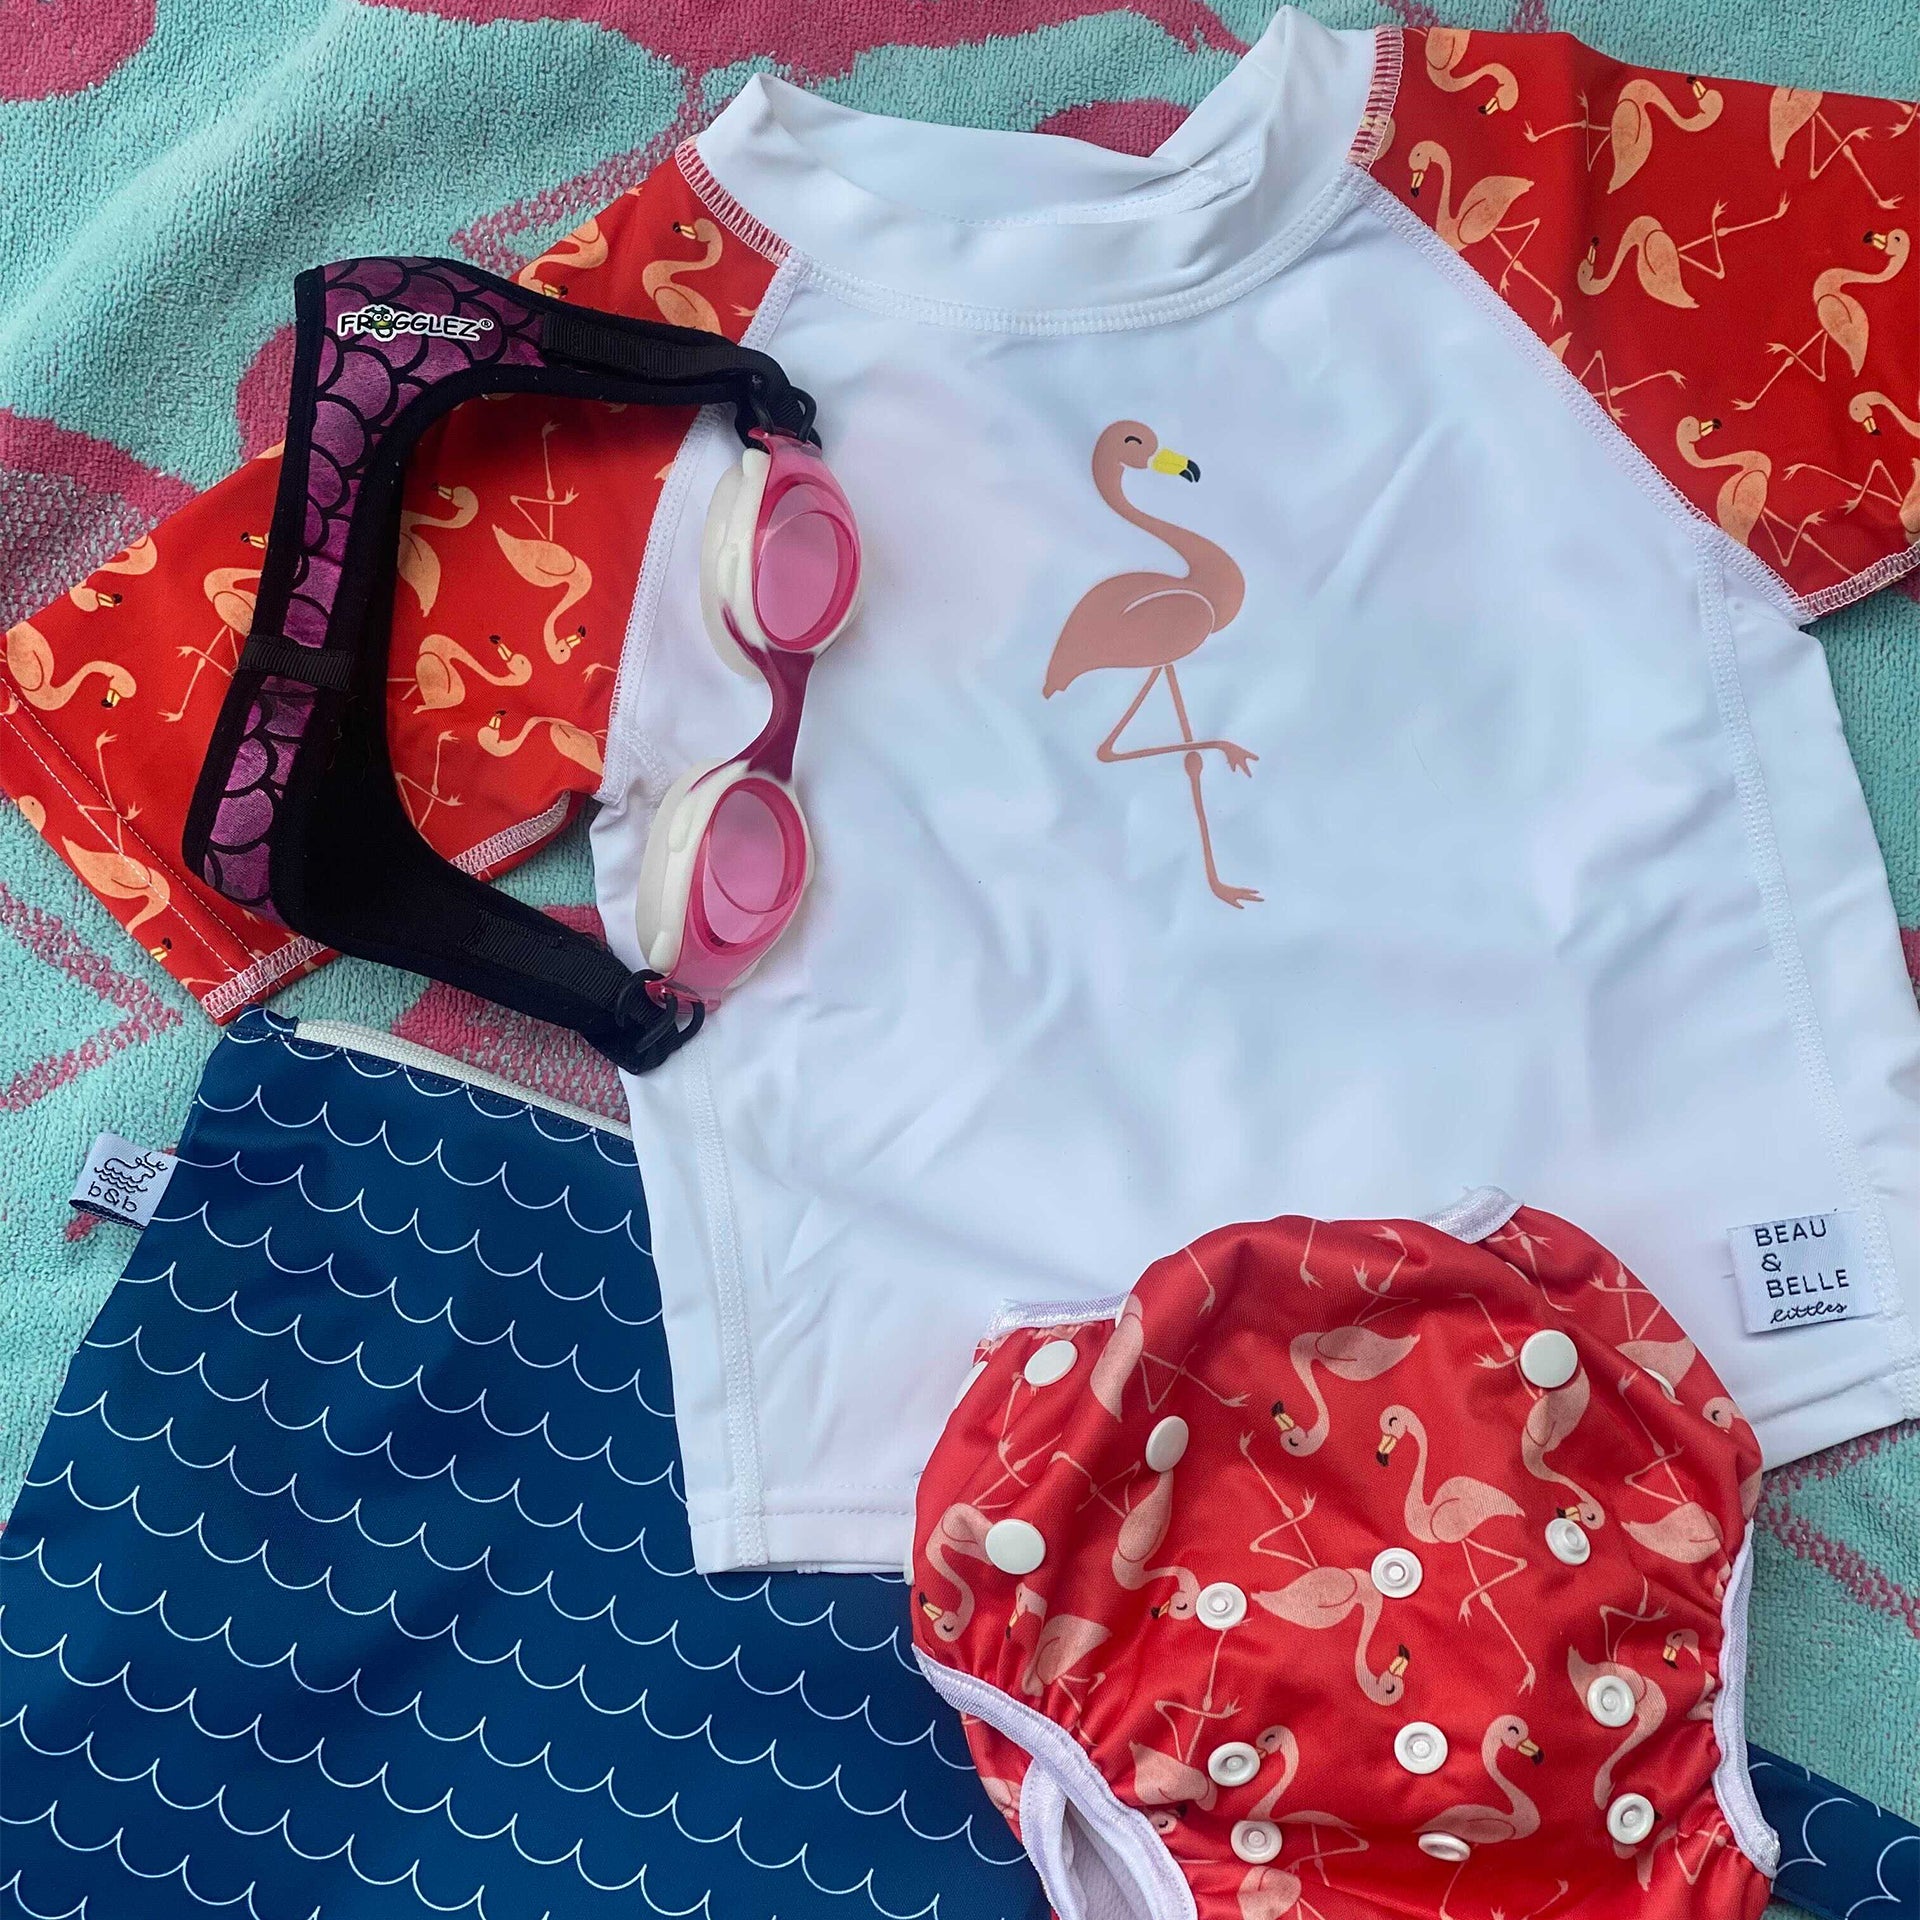 swimming starter kit for girls with pink Frogglez Goggles, a blue waves wet bag, flamingo swim bottom with a diaper included, and a matching swim shirt